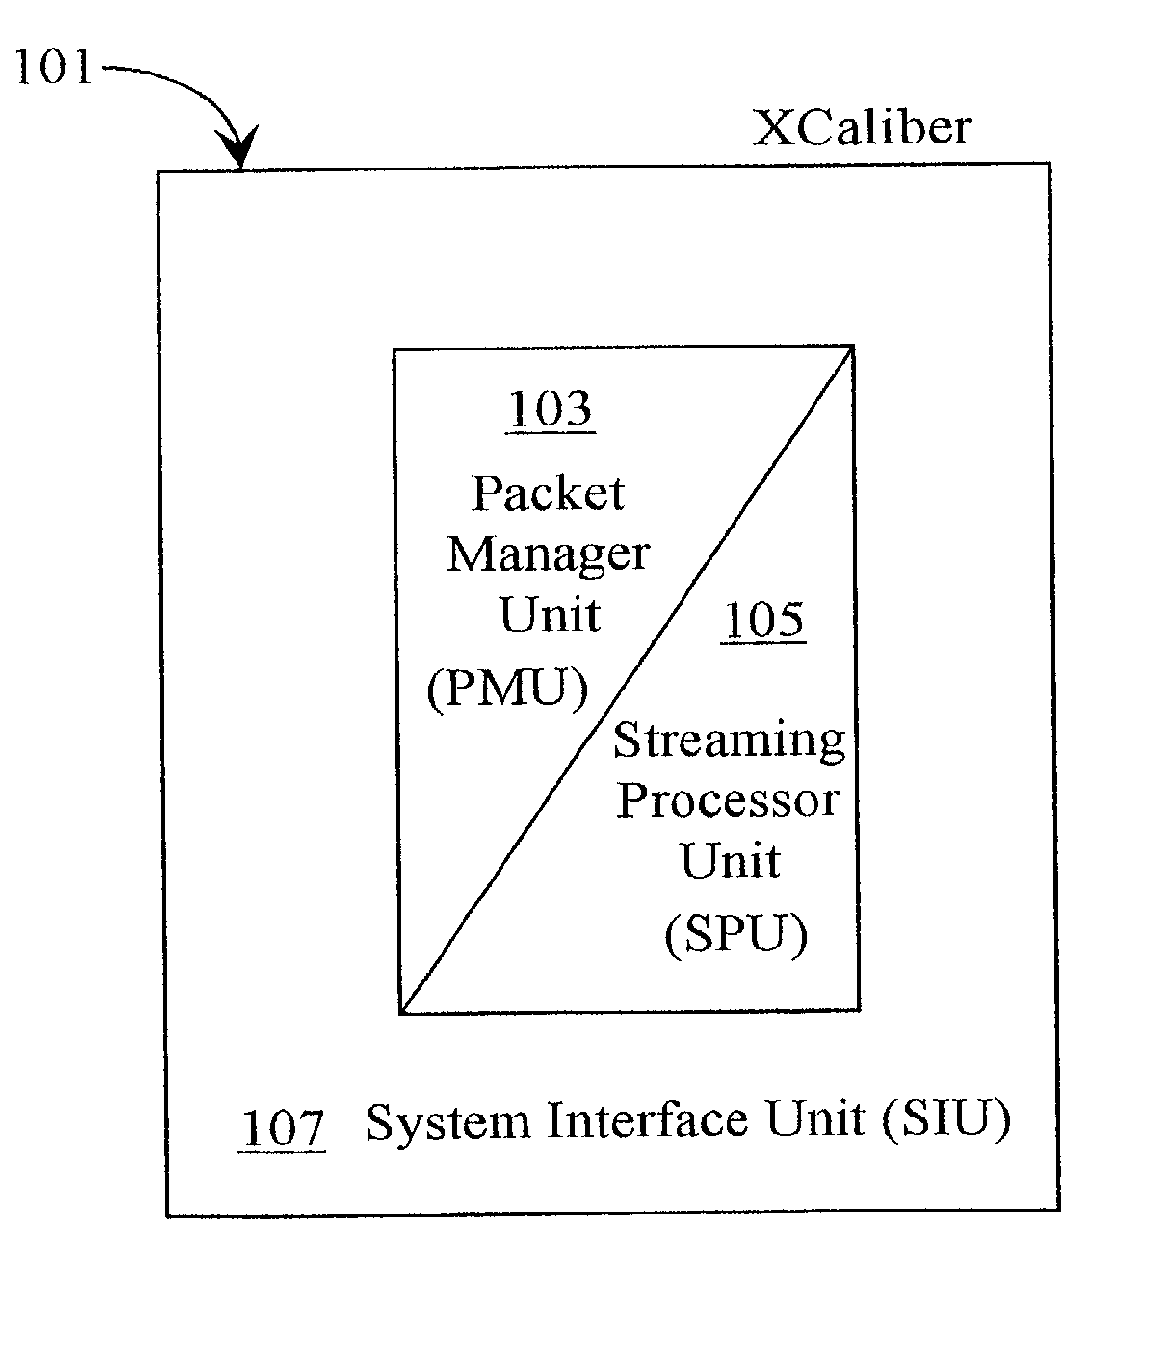 Functional validation of a packet management unit